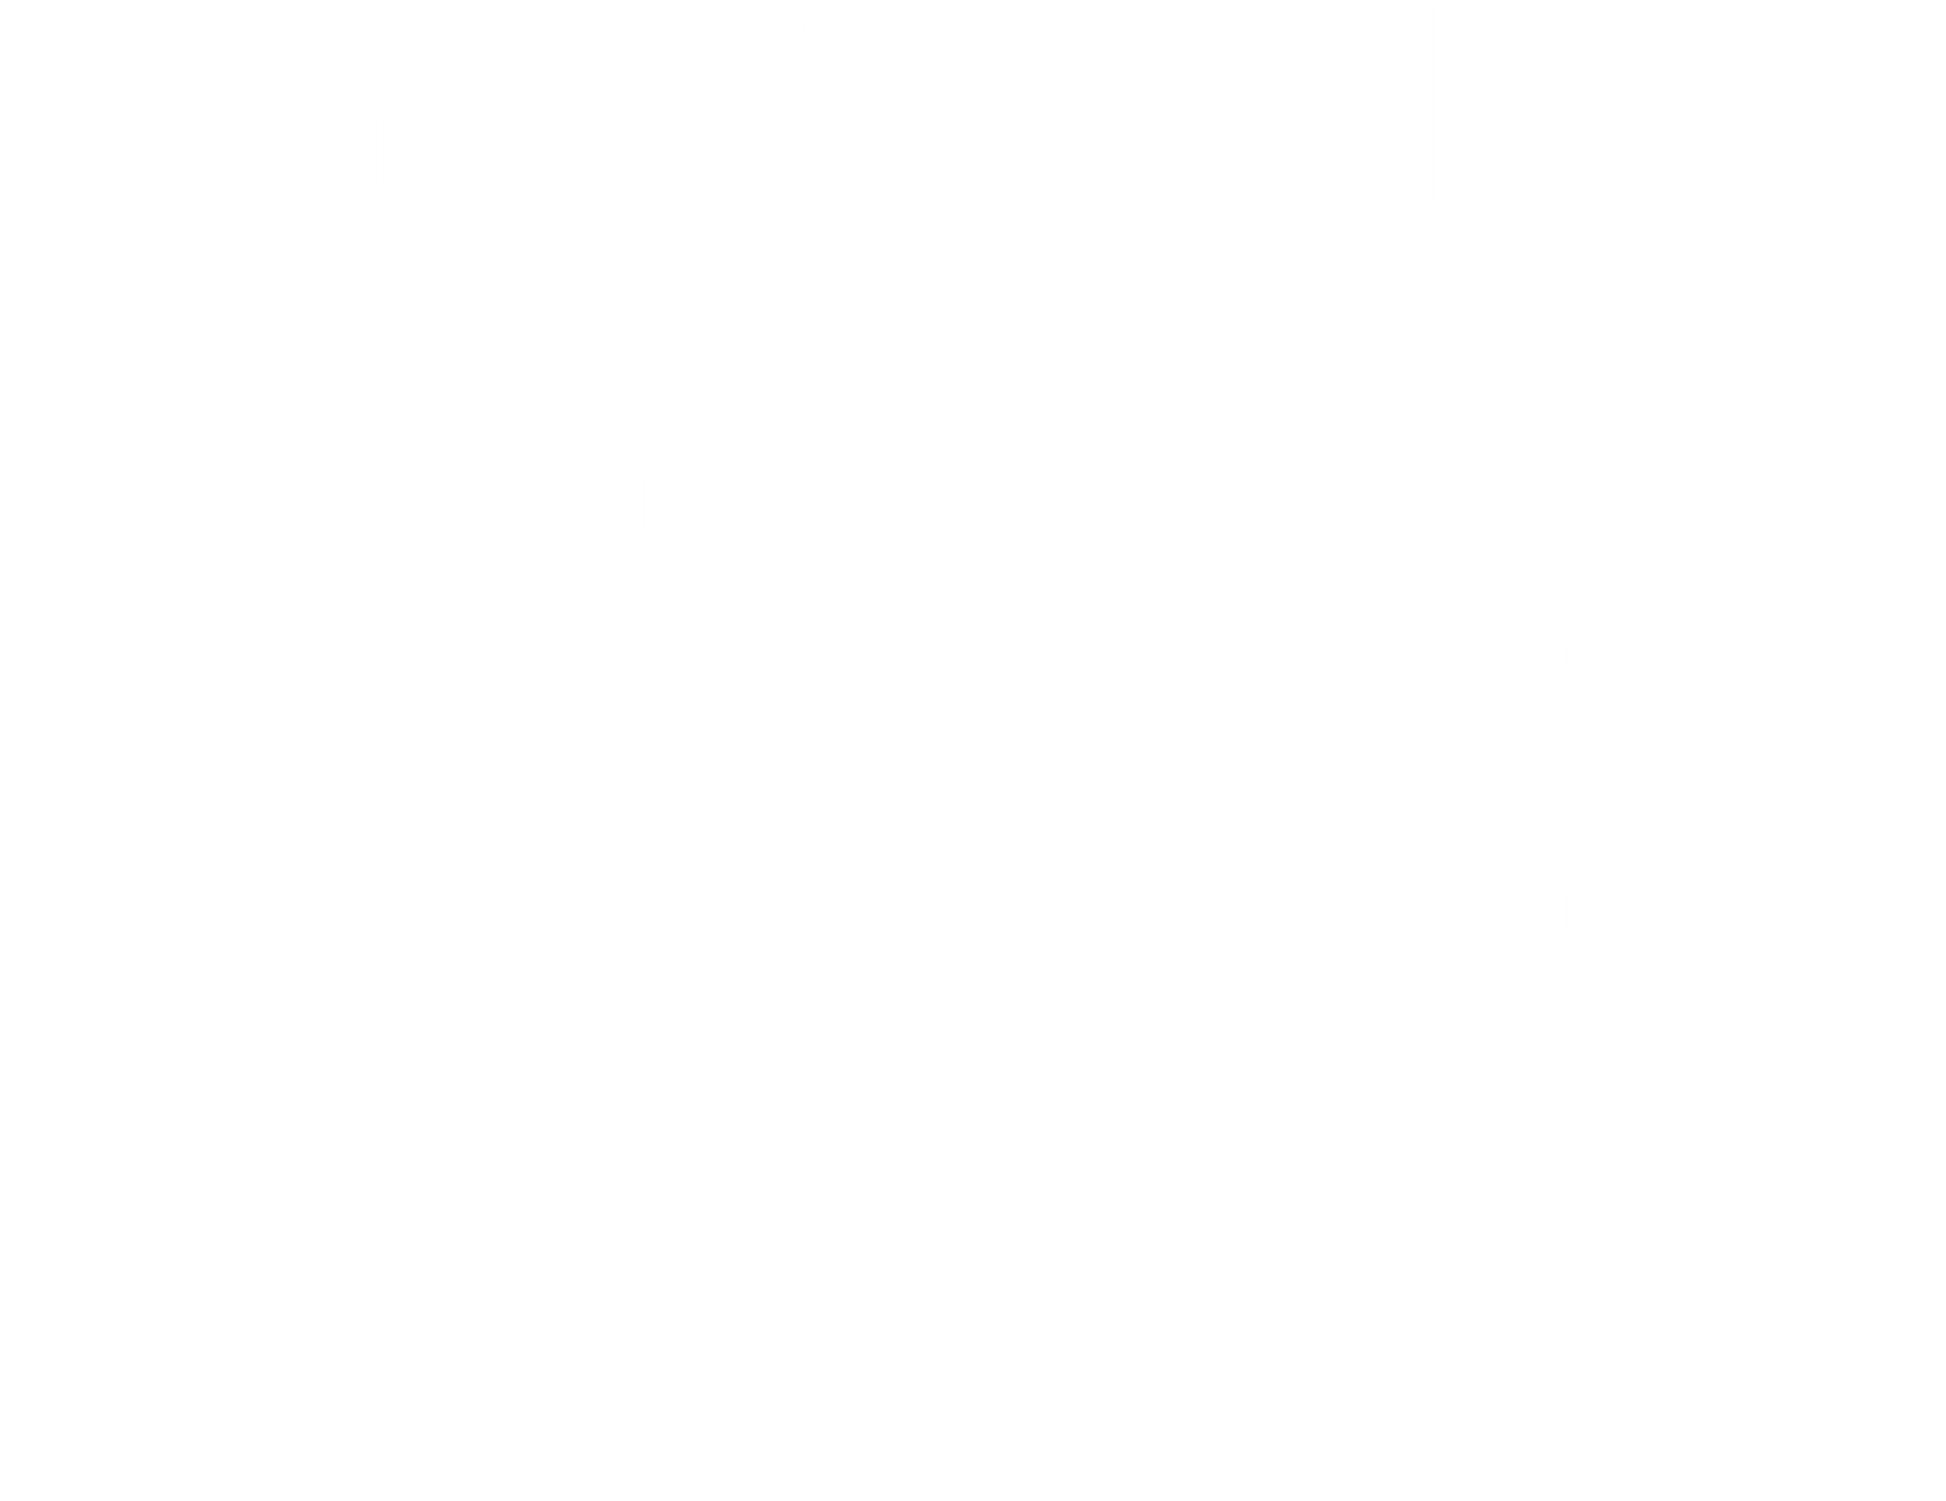 Funny T-Shirts design "Something I Do Every Day"